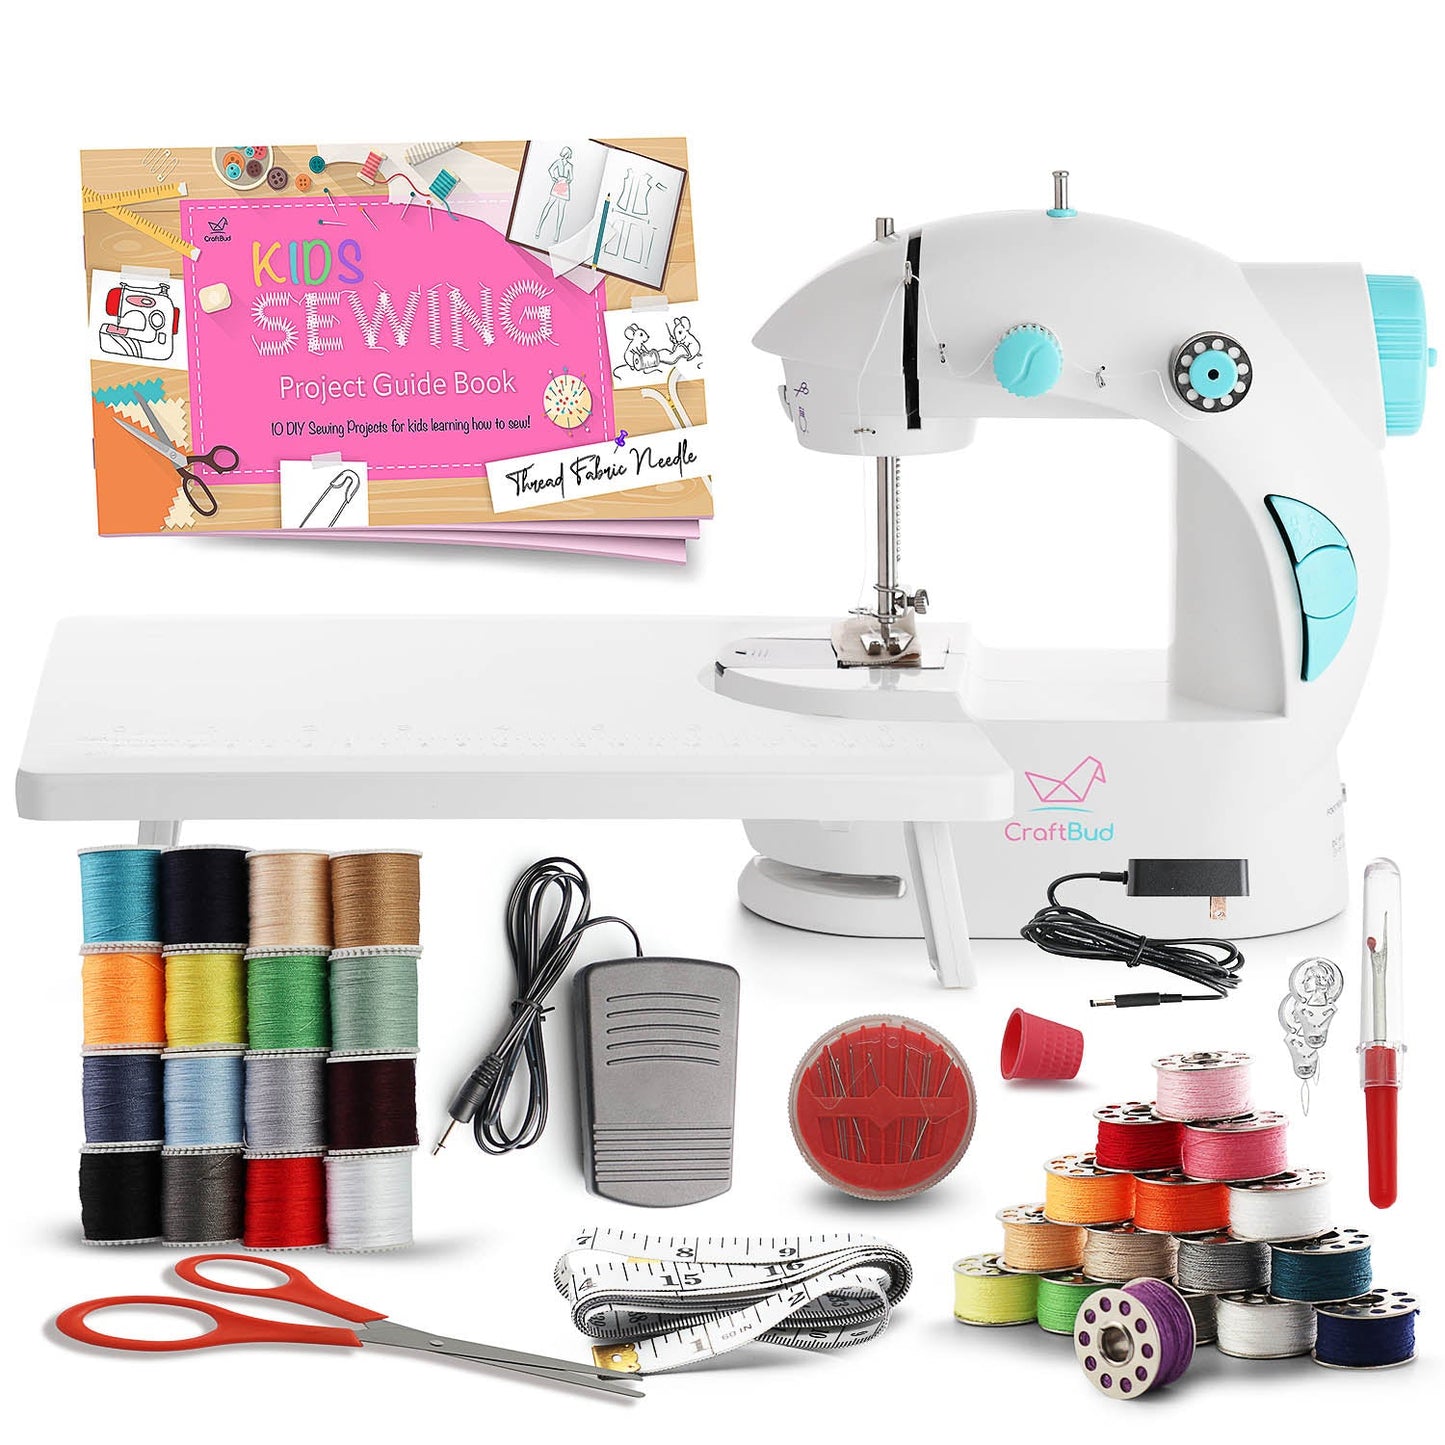 Mini Sewing Machine for Beginners with Sewing Kit, 48 PC Dual Speed Portable Sewing Machine, Kids Sewing Machine with DIY Sewing Book & More